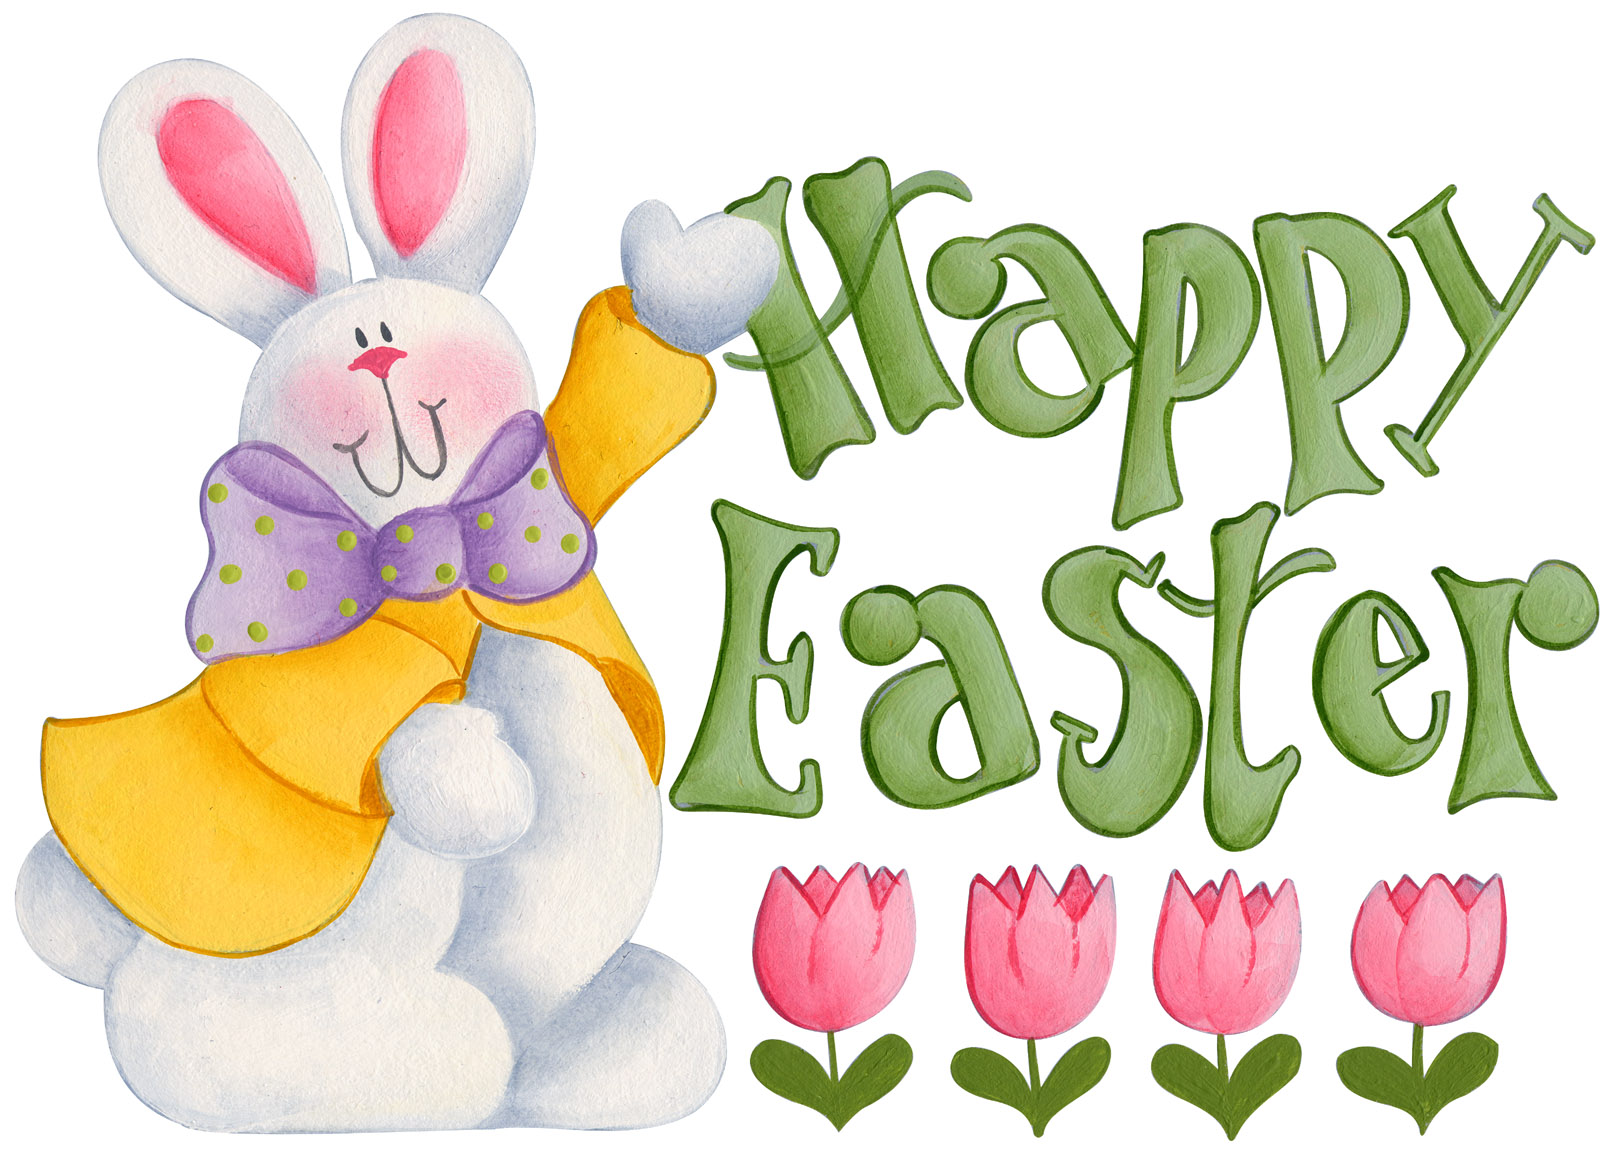 Happy Easter Day Images,Easter Pictures, Quotes and Wishes